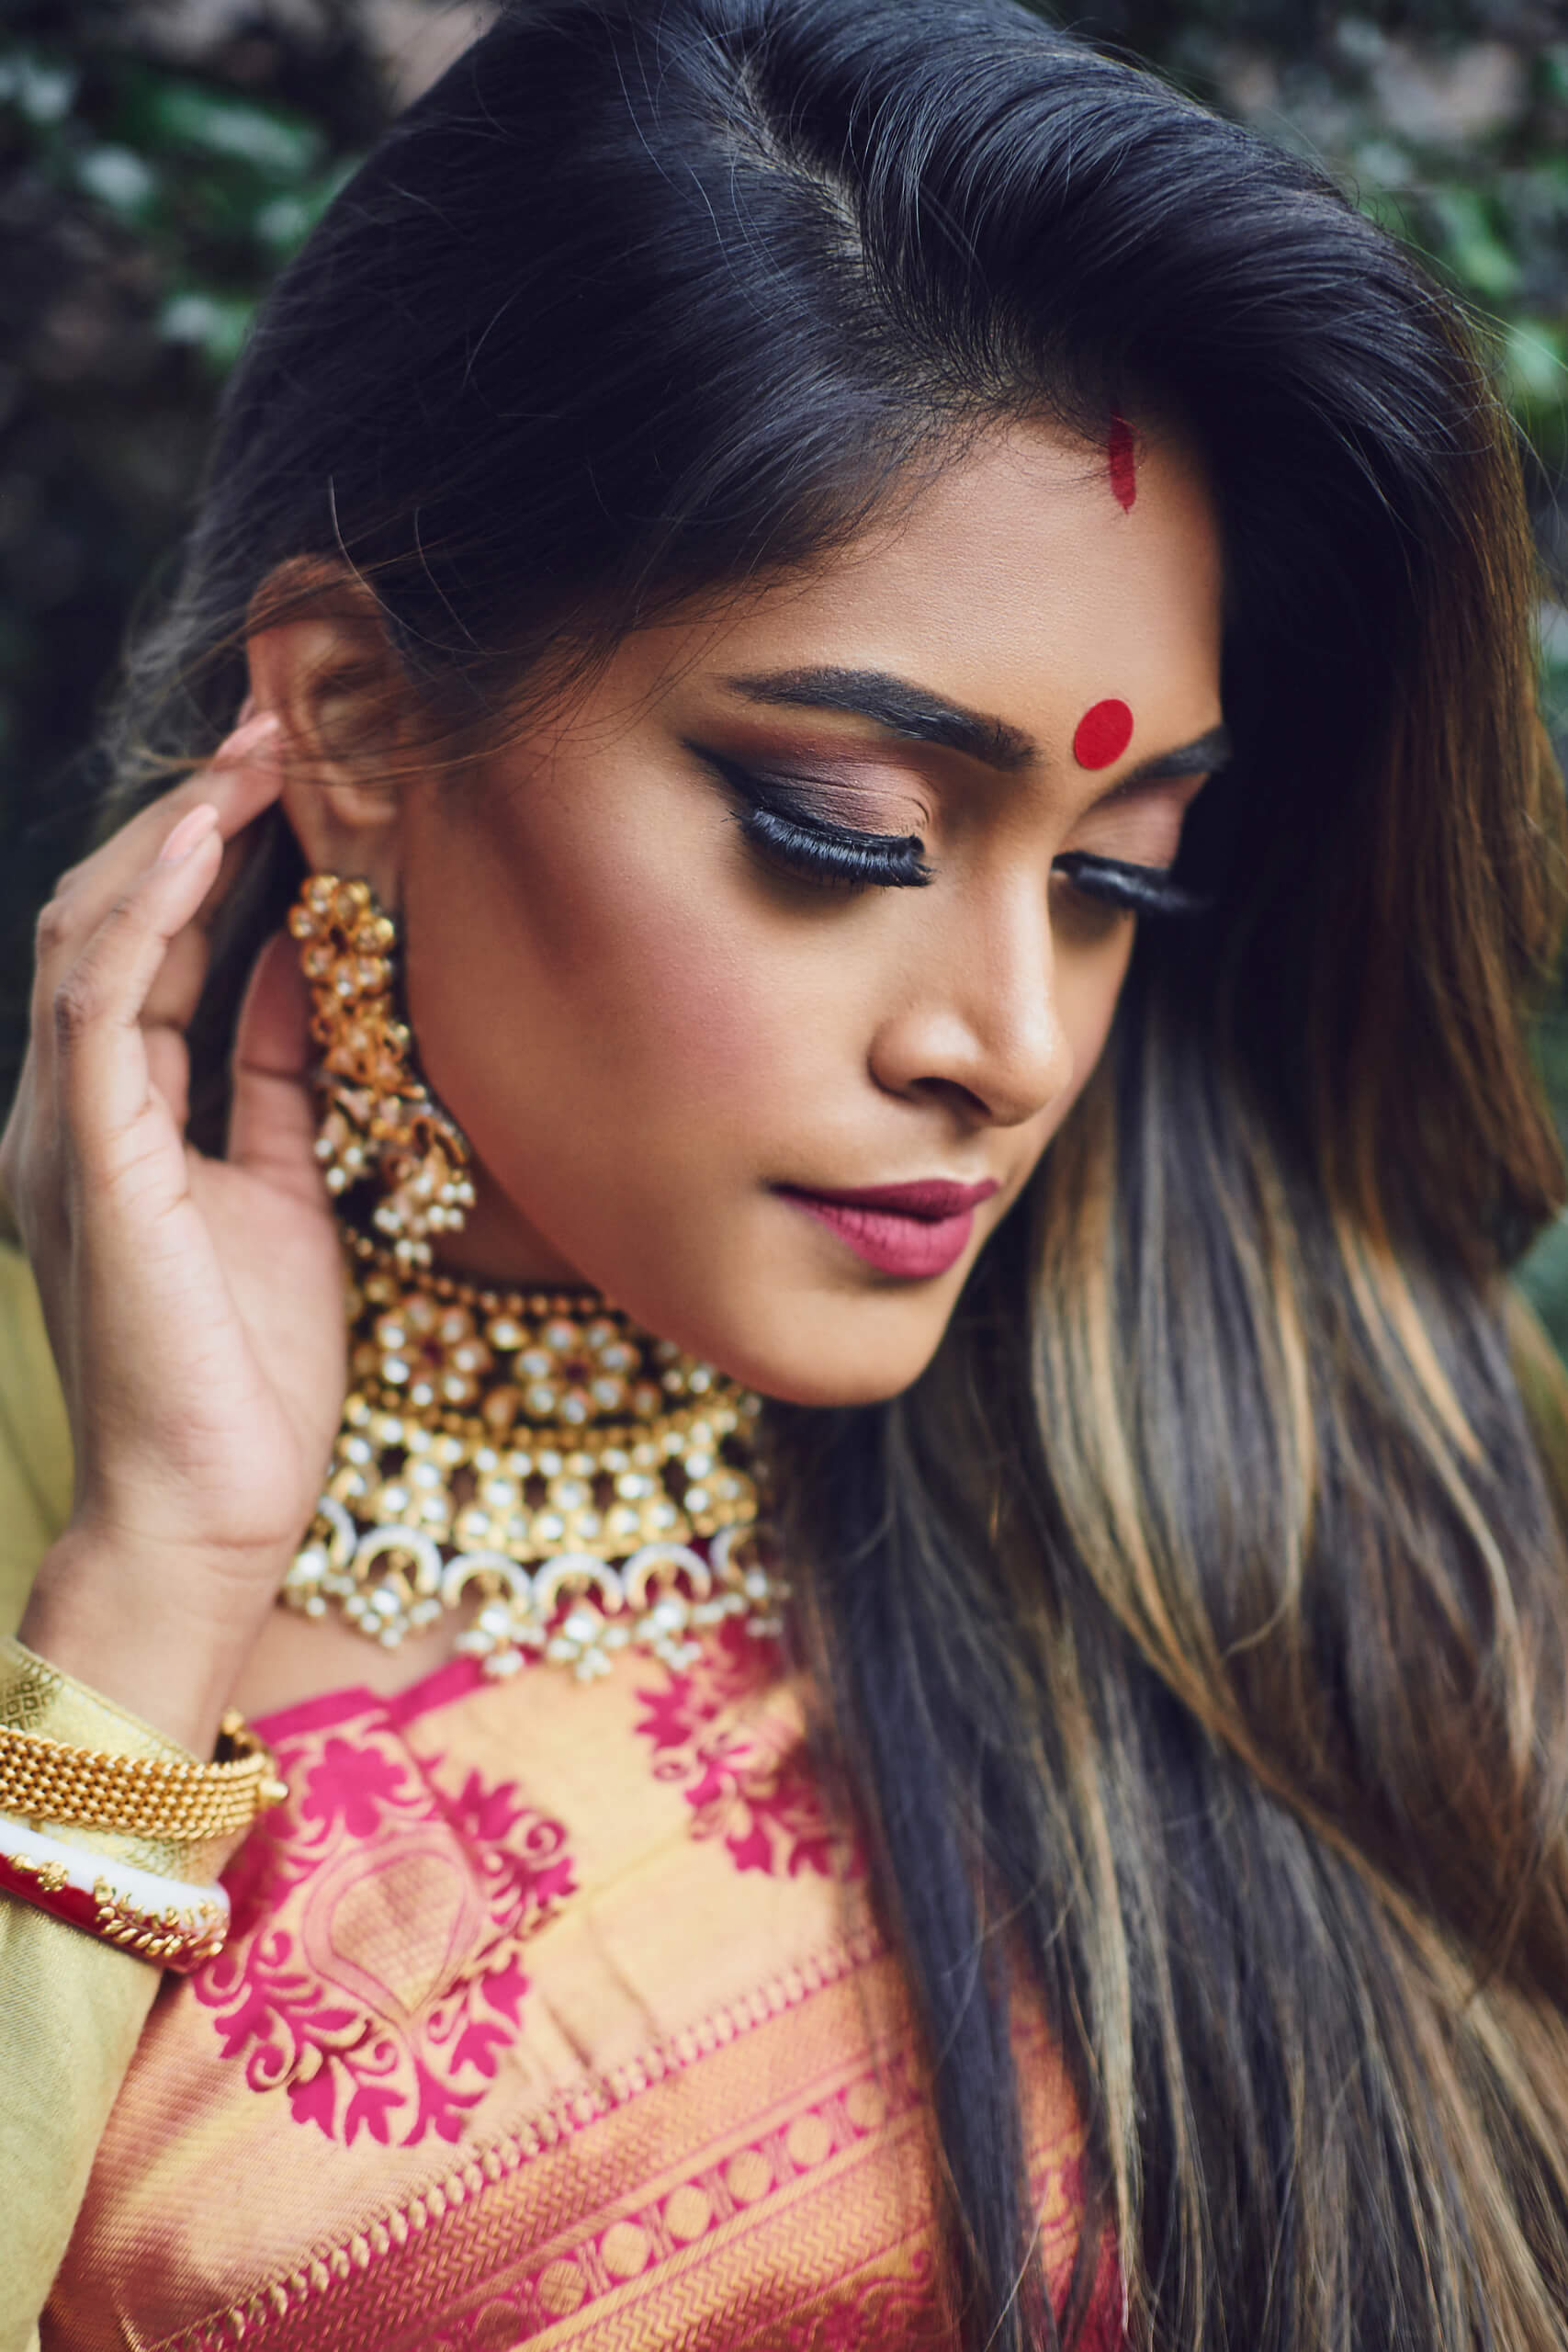 Sumona - Reemat Designs - Indian Jewelry - Indian Fashion - Lifestyle Photography -Portrait Photography - Englewood New Jersey